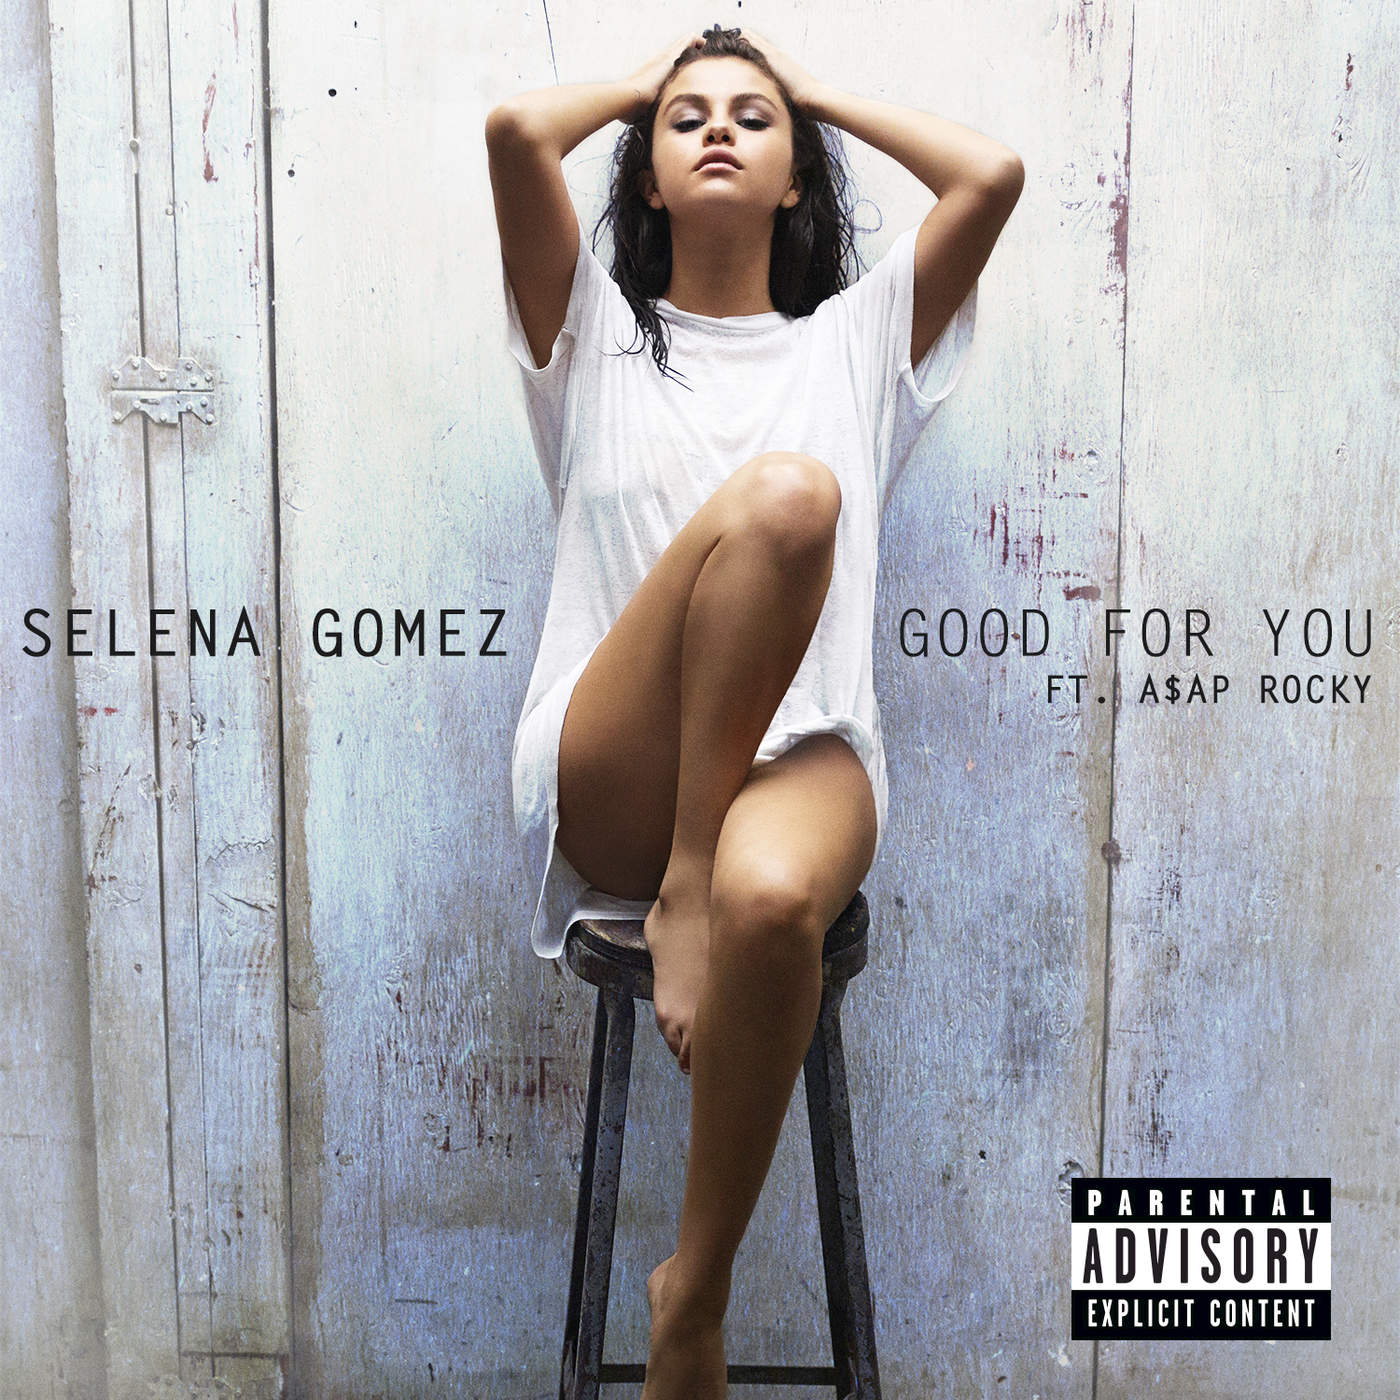 Selena Gomez featuring A$AP Rocky — Good for You cover artwork